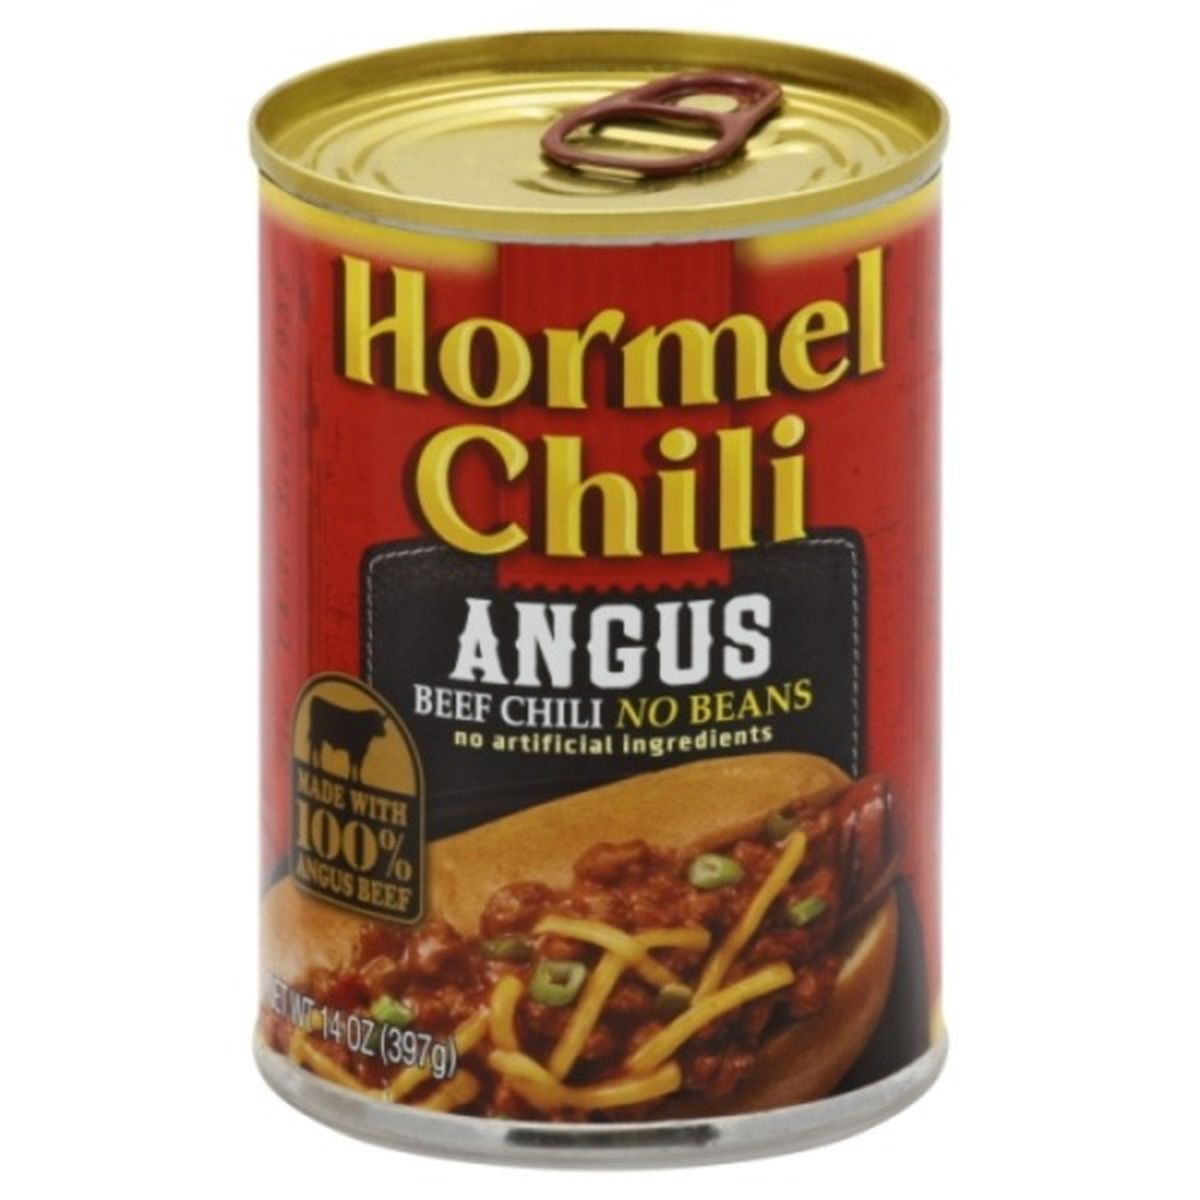 Calories in Hormel Chili, Angus Beef, No Beans